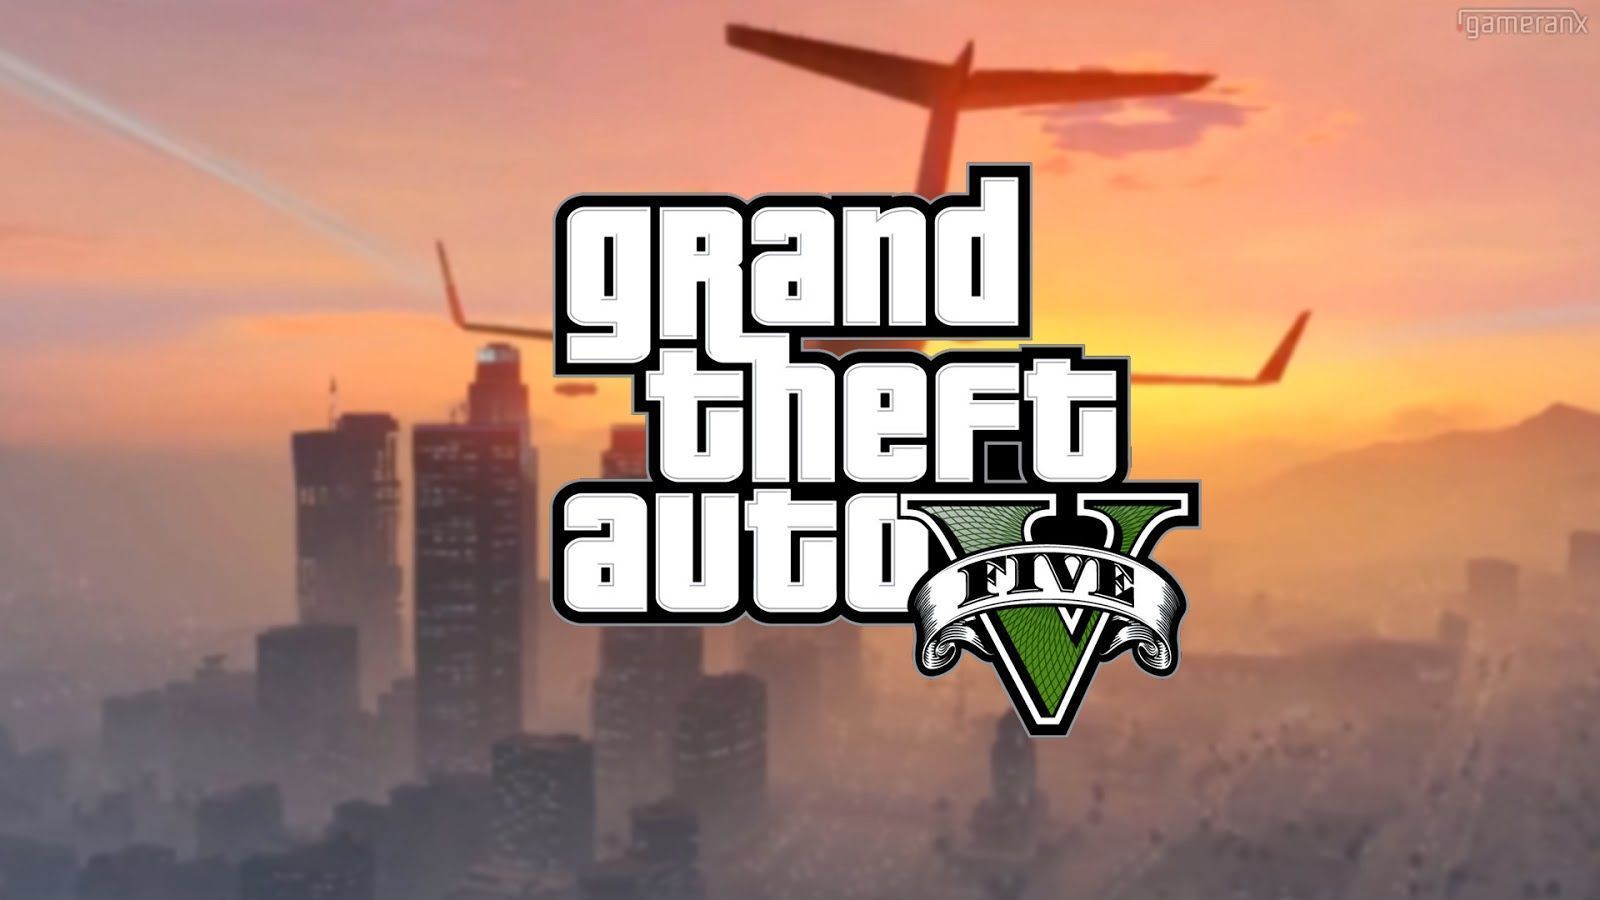 Grand Theft Auto V HD 1080p Wallpapers | Grand Theft Auto 5 Guide Blog